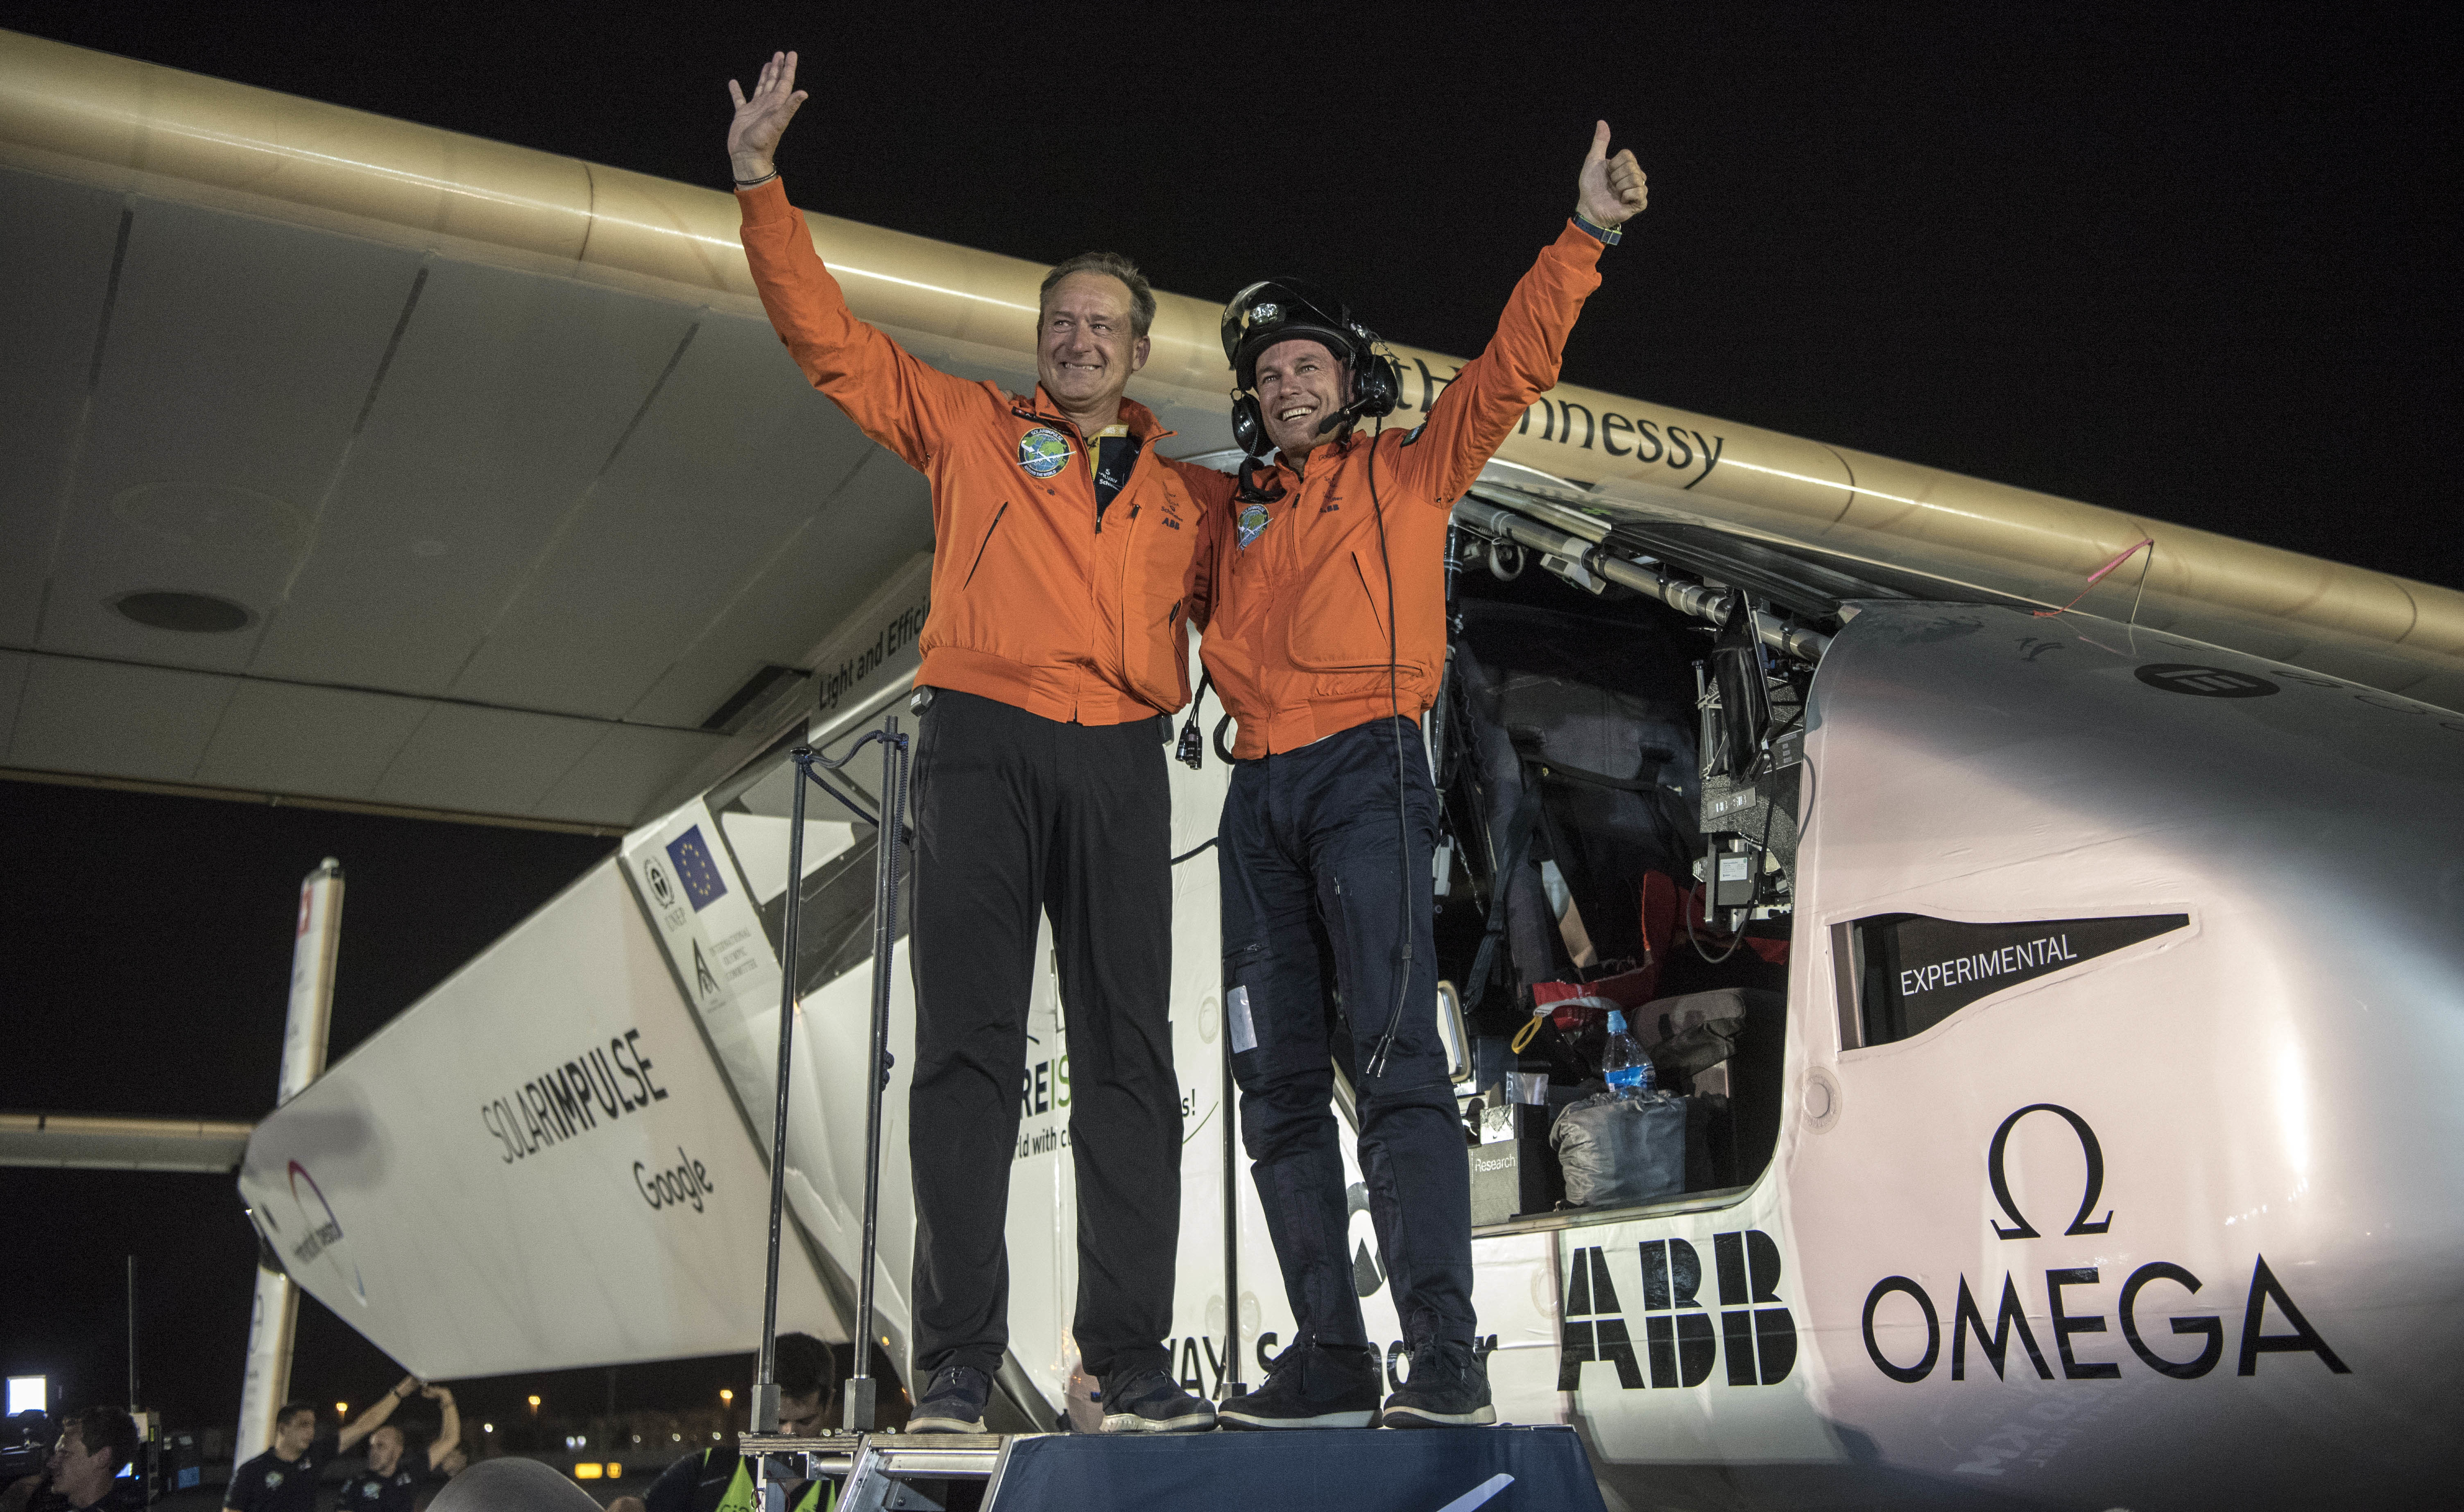 After Solar Impulse's successful landing in Abu Dhabi, the capital of the United Arab Emirates, with Bertrand Piccard at the controls, he posed with fellow pilot Andre Borschberg. The two alternated on 23 days' worth of flights without using any fuel.